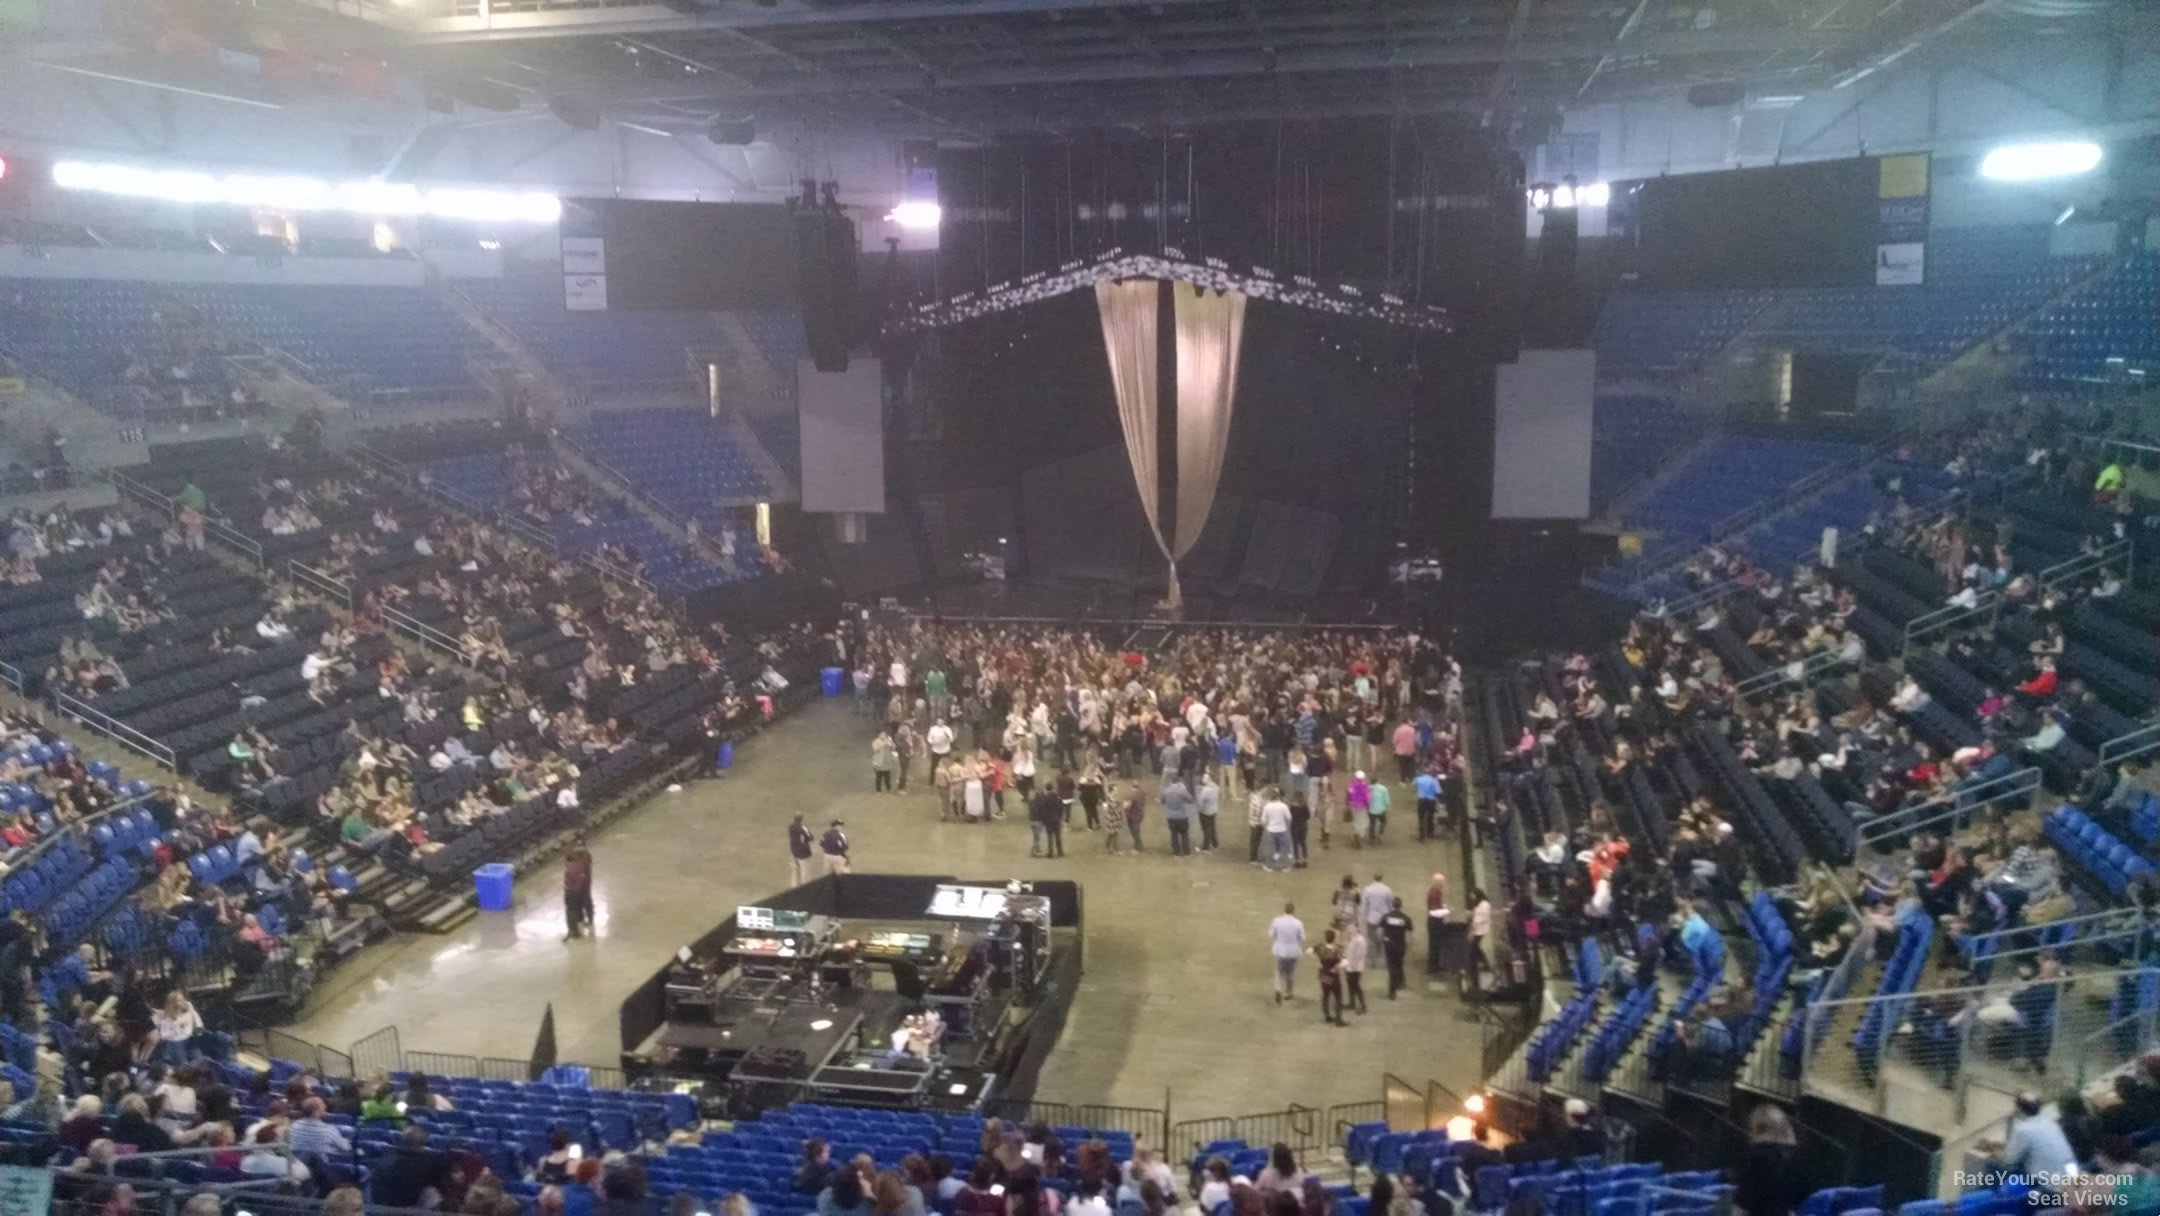 section 208, row d seat view  for concert - chaifetz arena